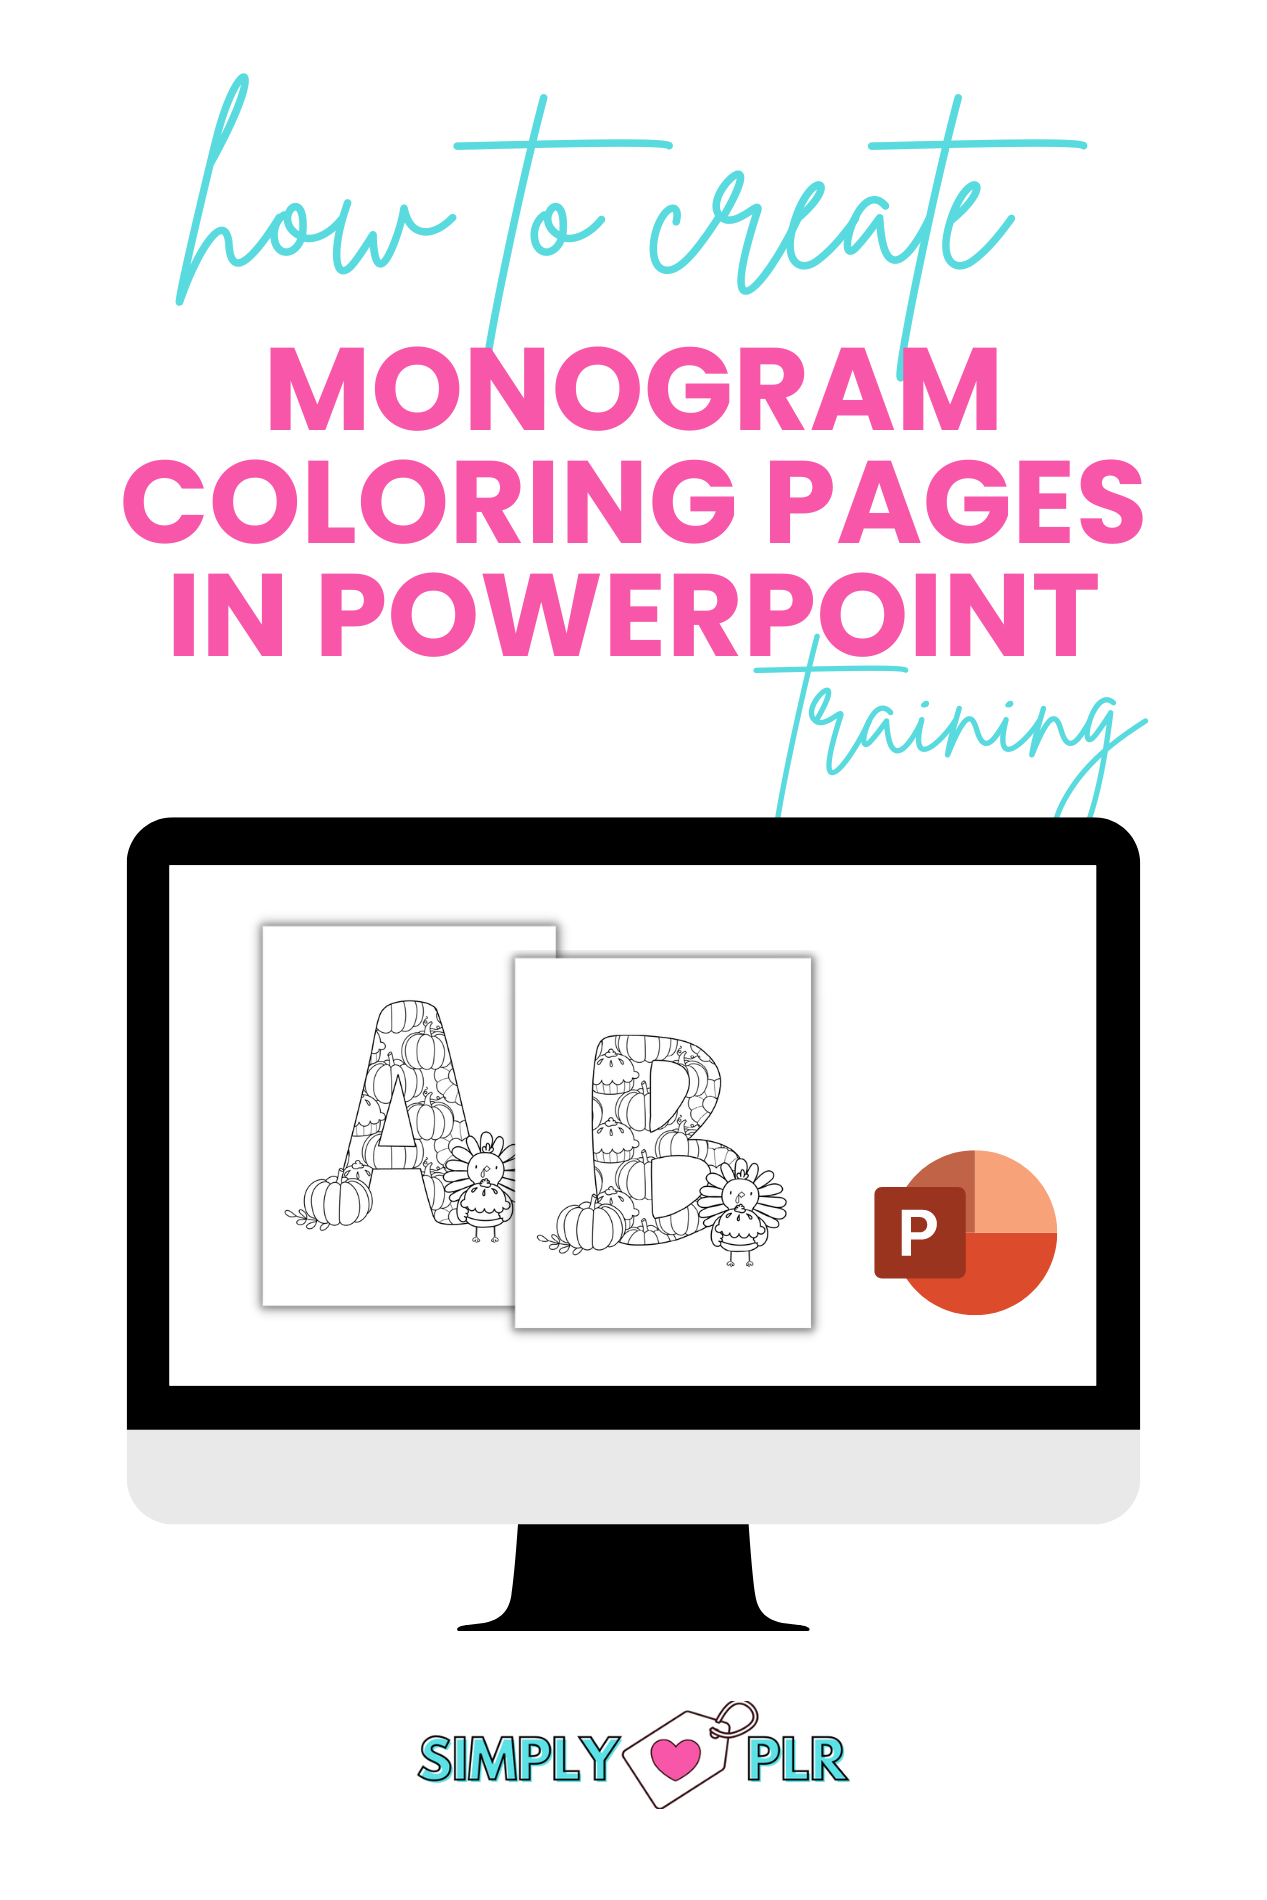 HOW TO CREATE MONOGRAM COLORING PAGES IN POWERPOINT TRAINING VIDEO